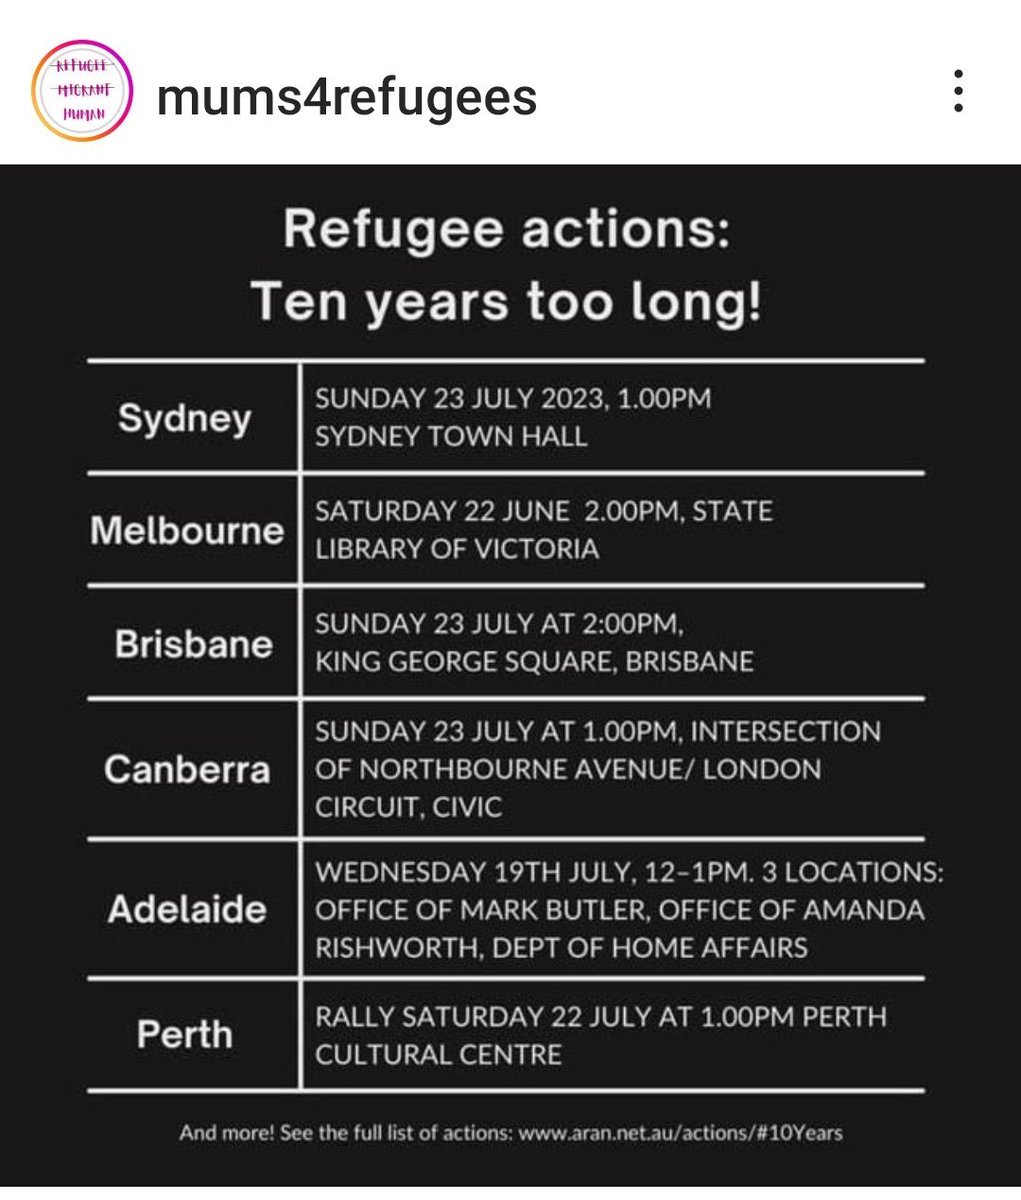 Today marks #10yearstoolong since Kevin Rudd’s declaration left thousands of asylum seekers and refugees in limbo. Please join the rallies this weekend to demand the current ALP government grants permanent protection visas to all. #auspol